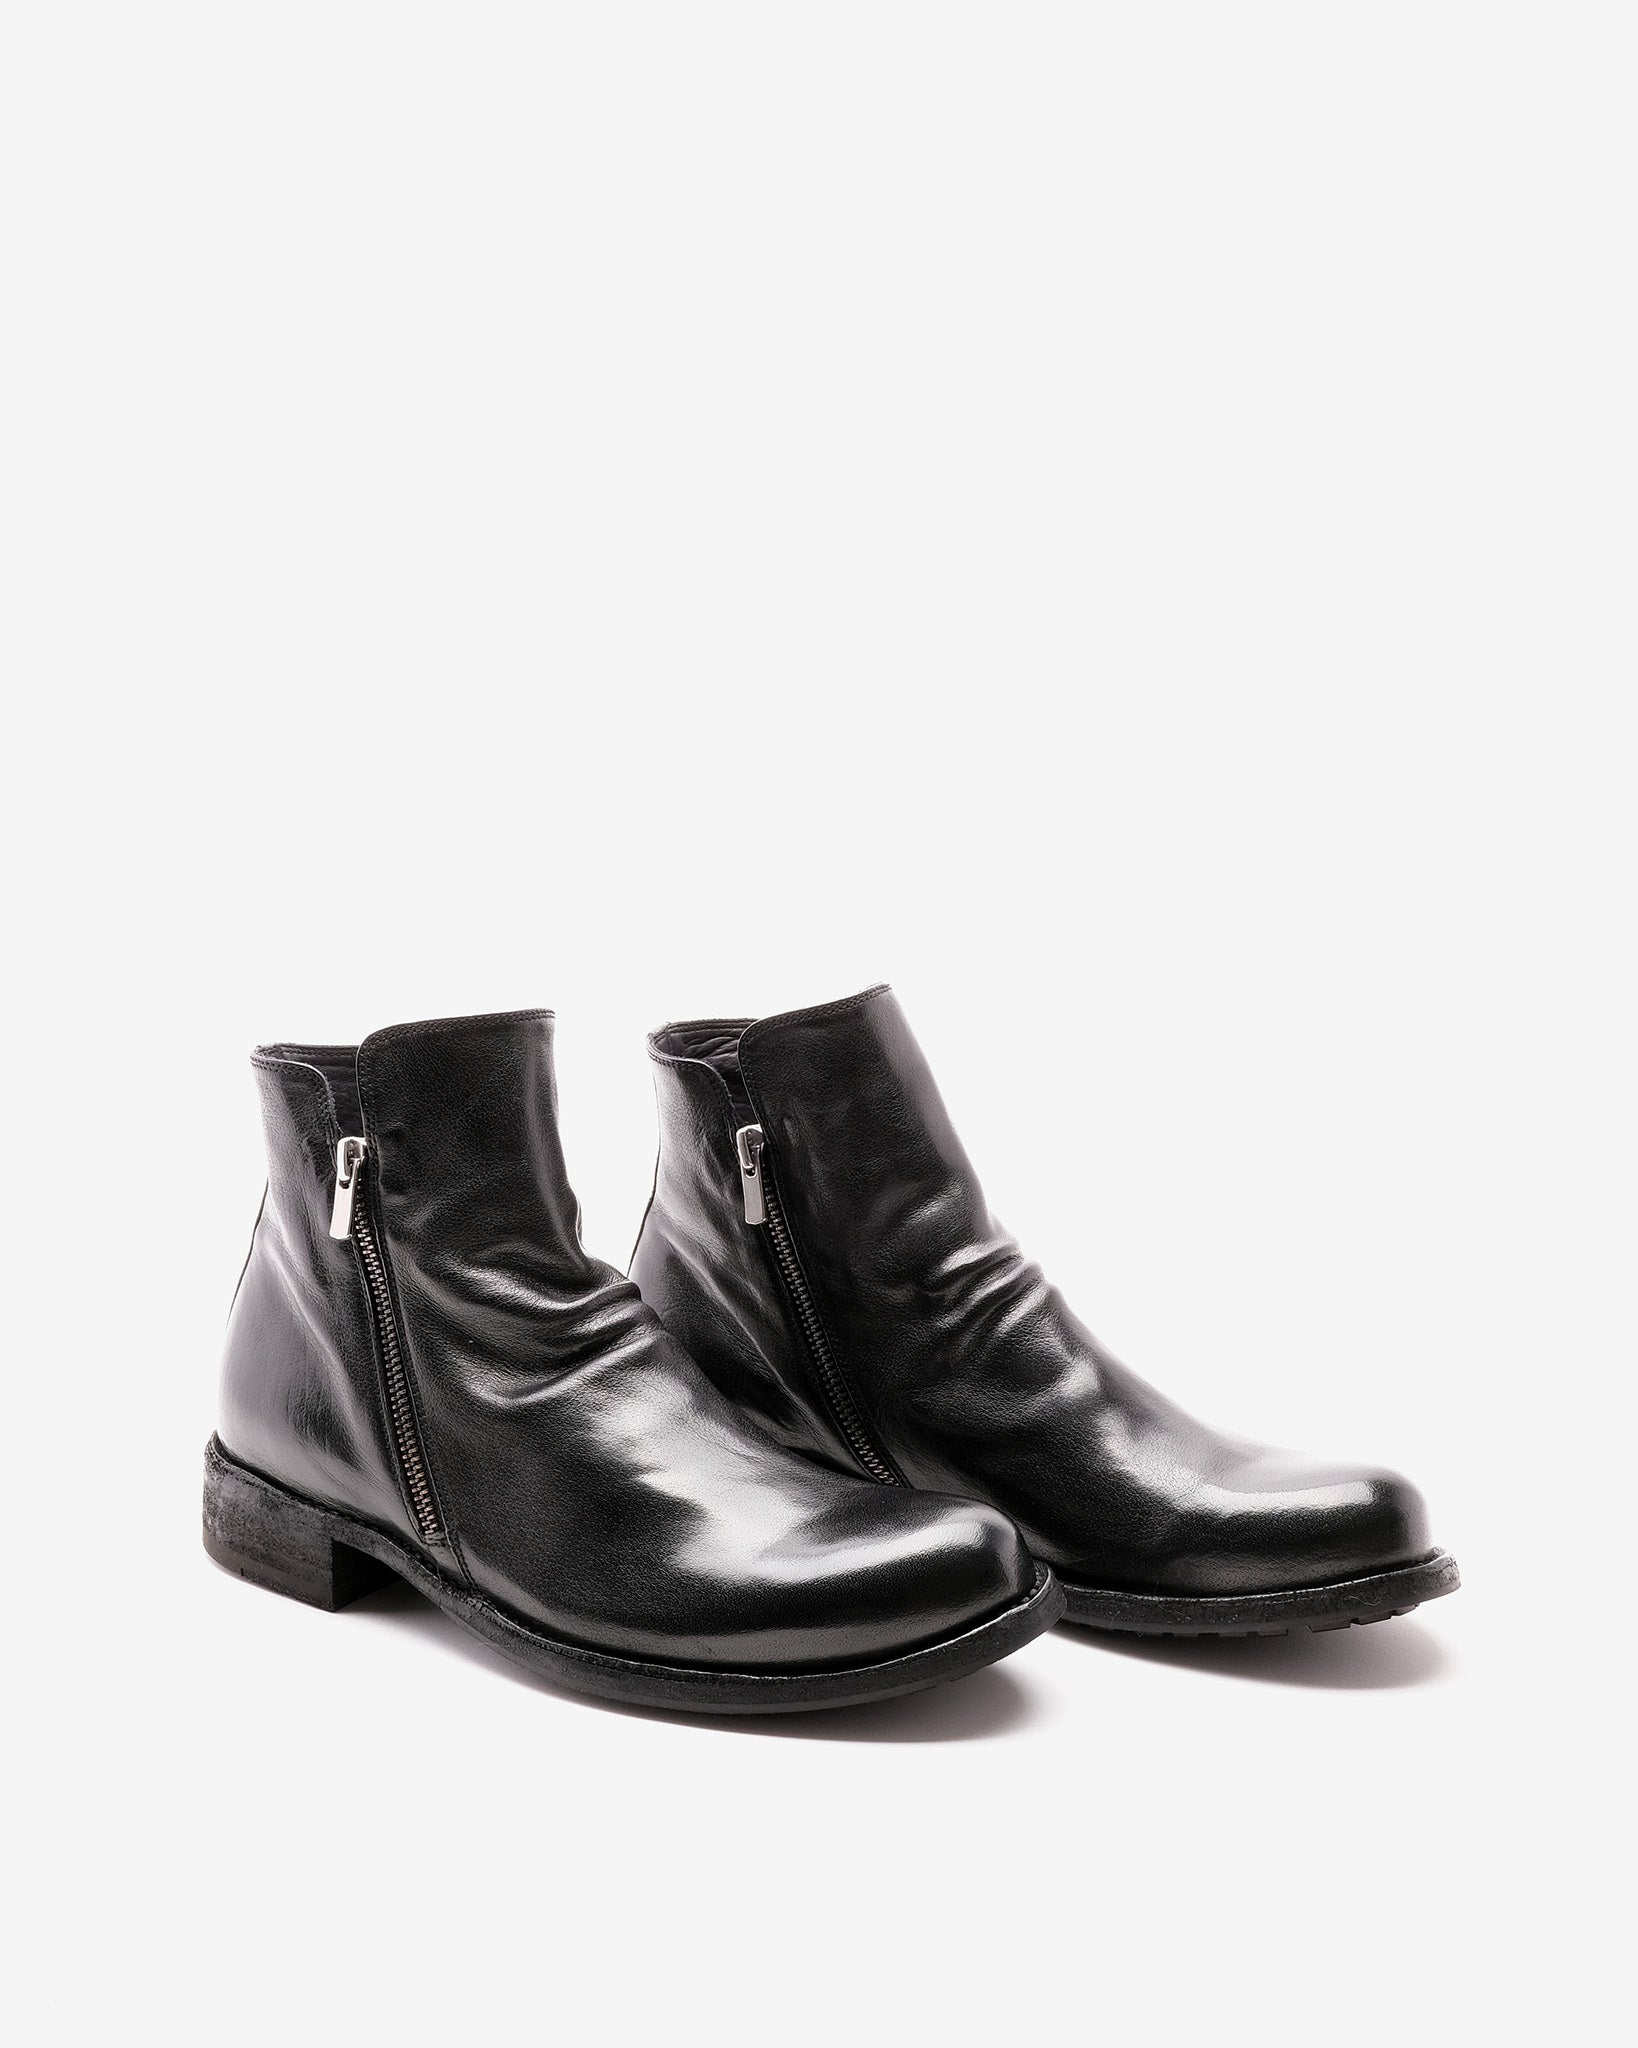 Legrand 200 Ignis T. Nero Leather Boots